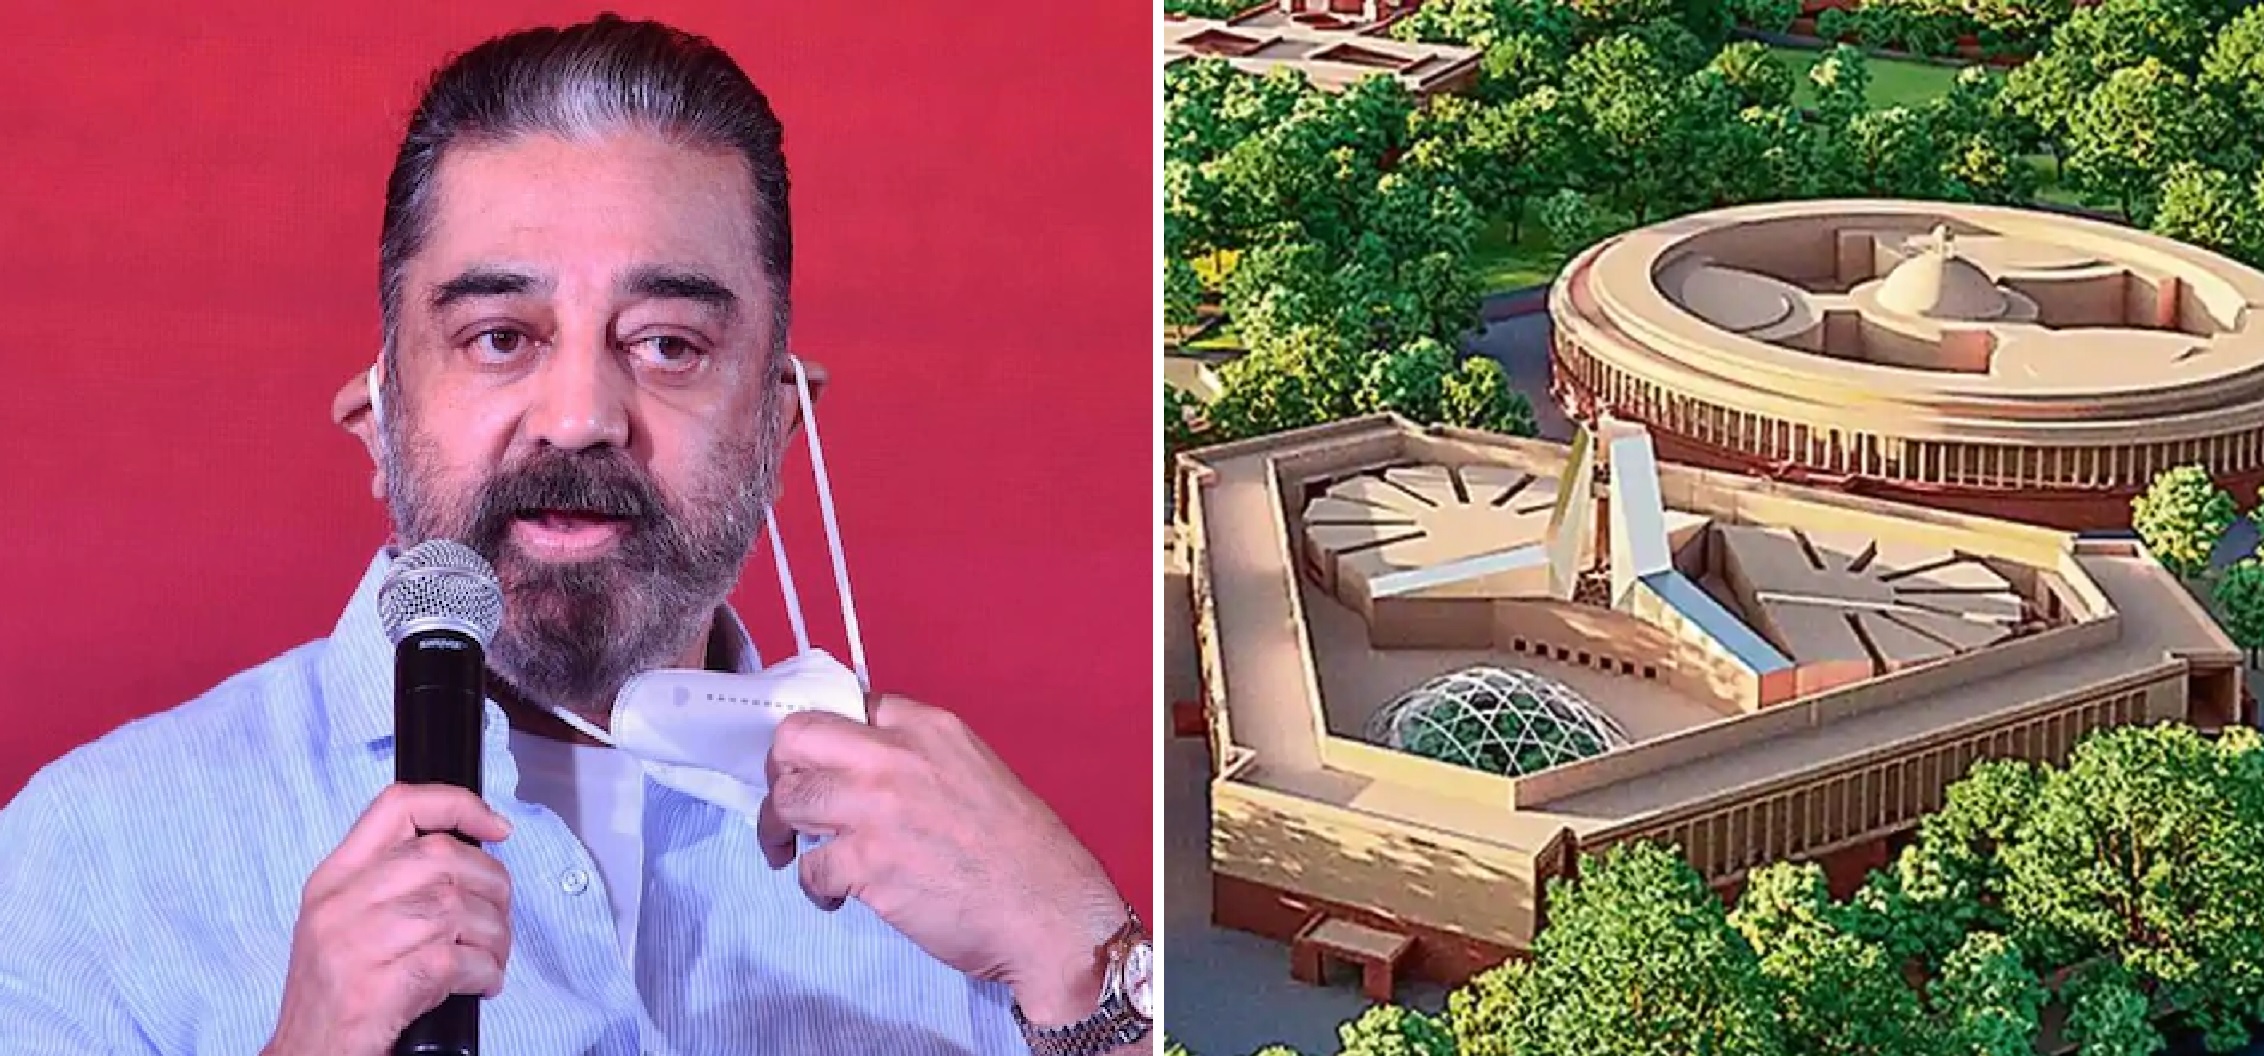 Kamal Haasan Questions Why Government Is Spending Rs 1,000 Crore on New Parliament, “When Half of India is Hungry”